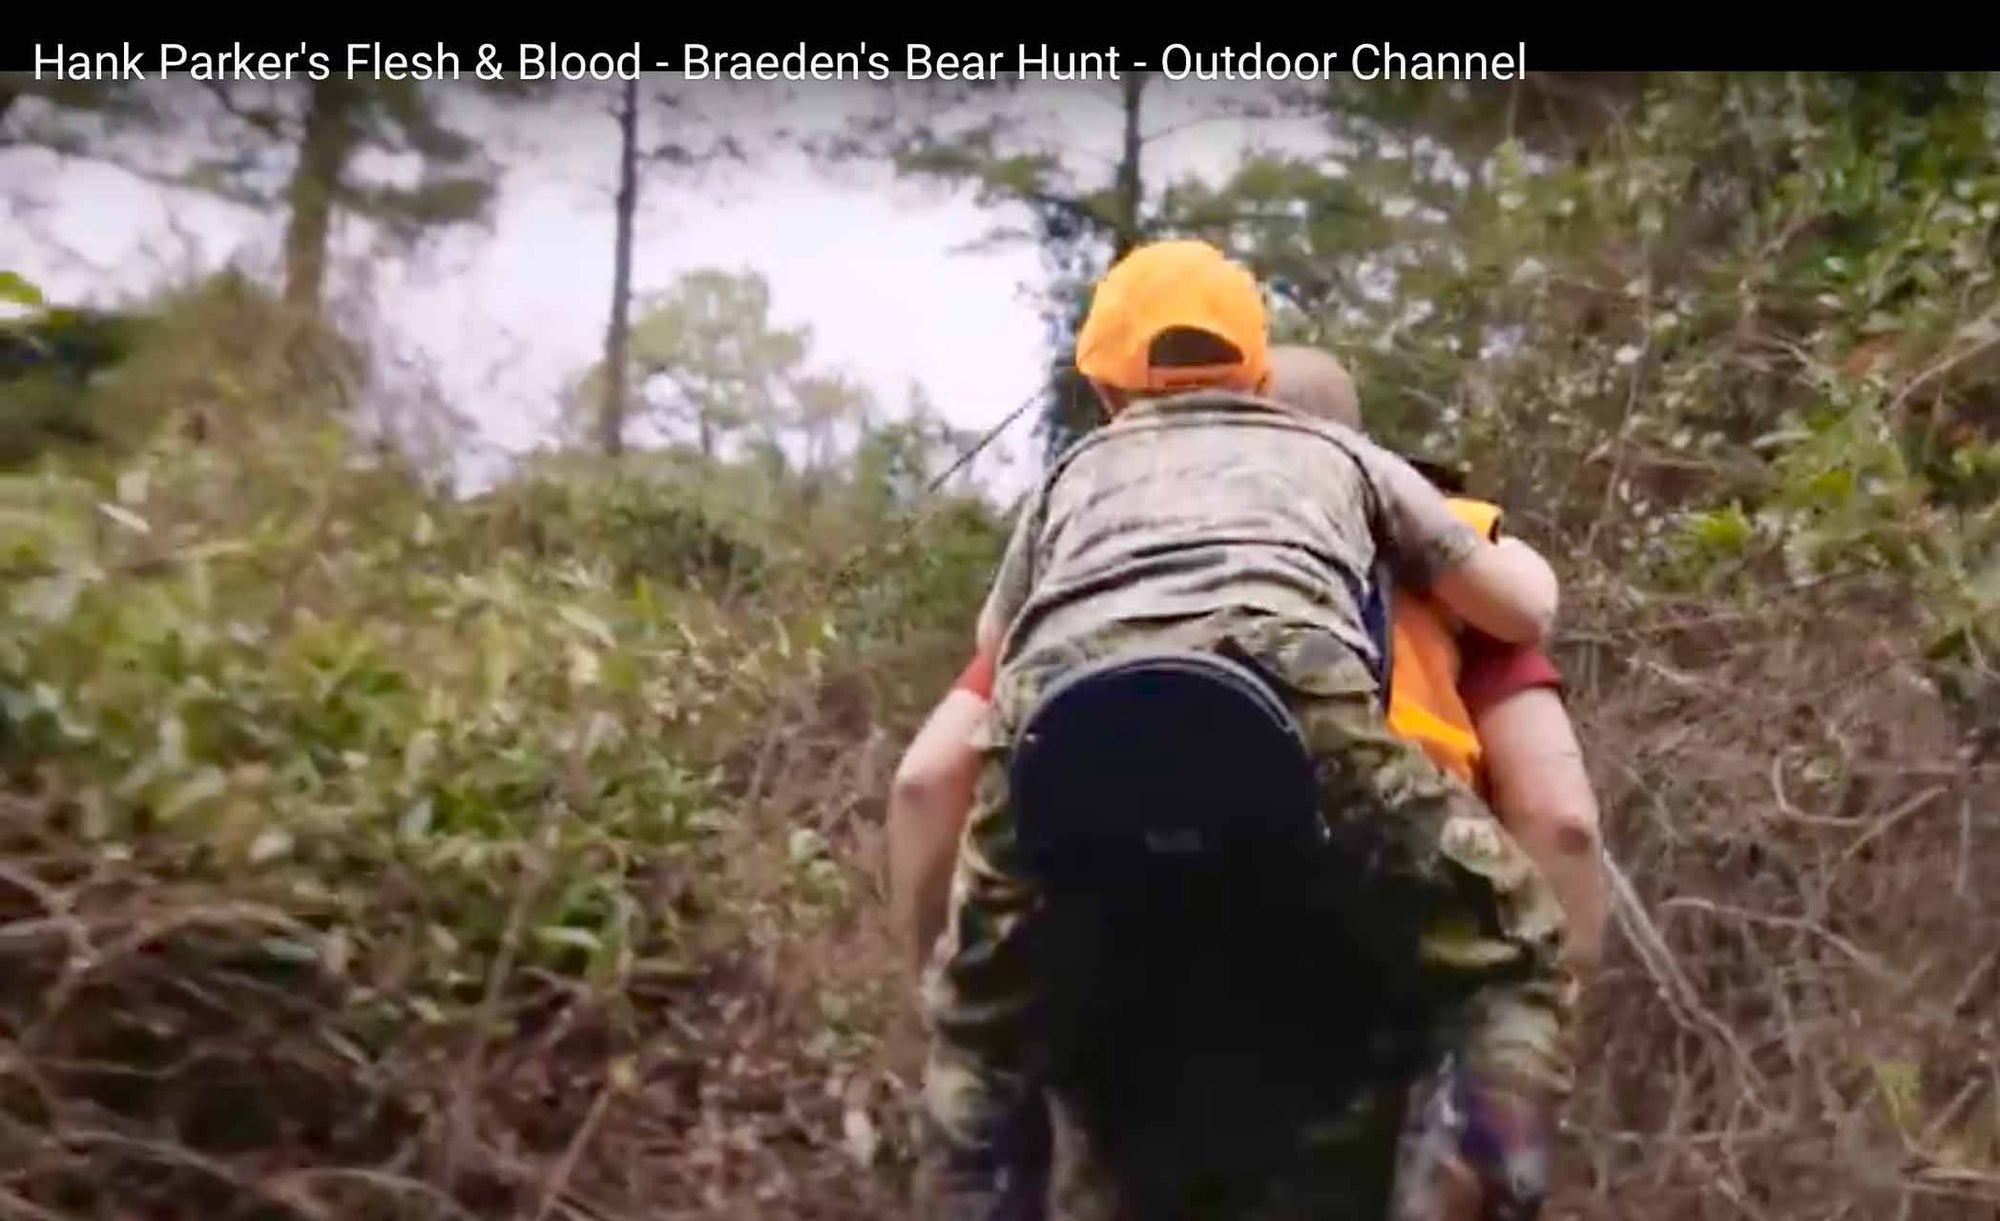 A dad, a dream, his boy and a bear. The Freeloader goes on a hunt. Featured on the Outdoor Channel!